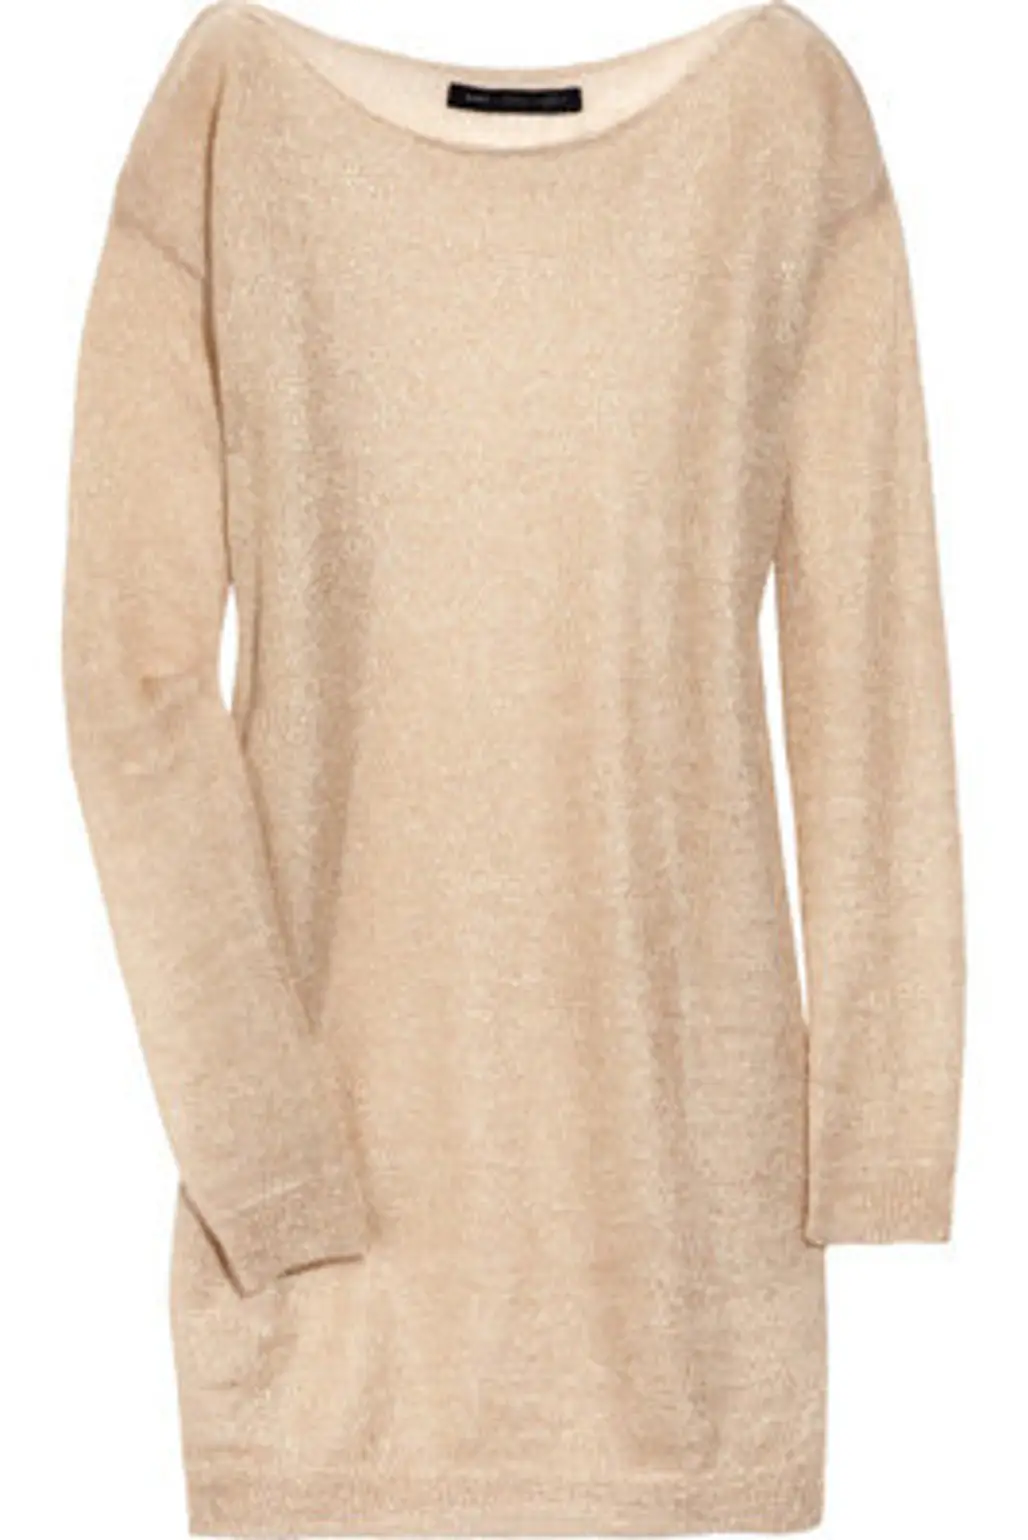 Marc by Marc Jacobs Sheer Mohair-Blend Sweater Dress